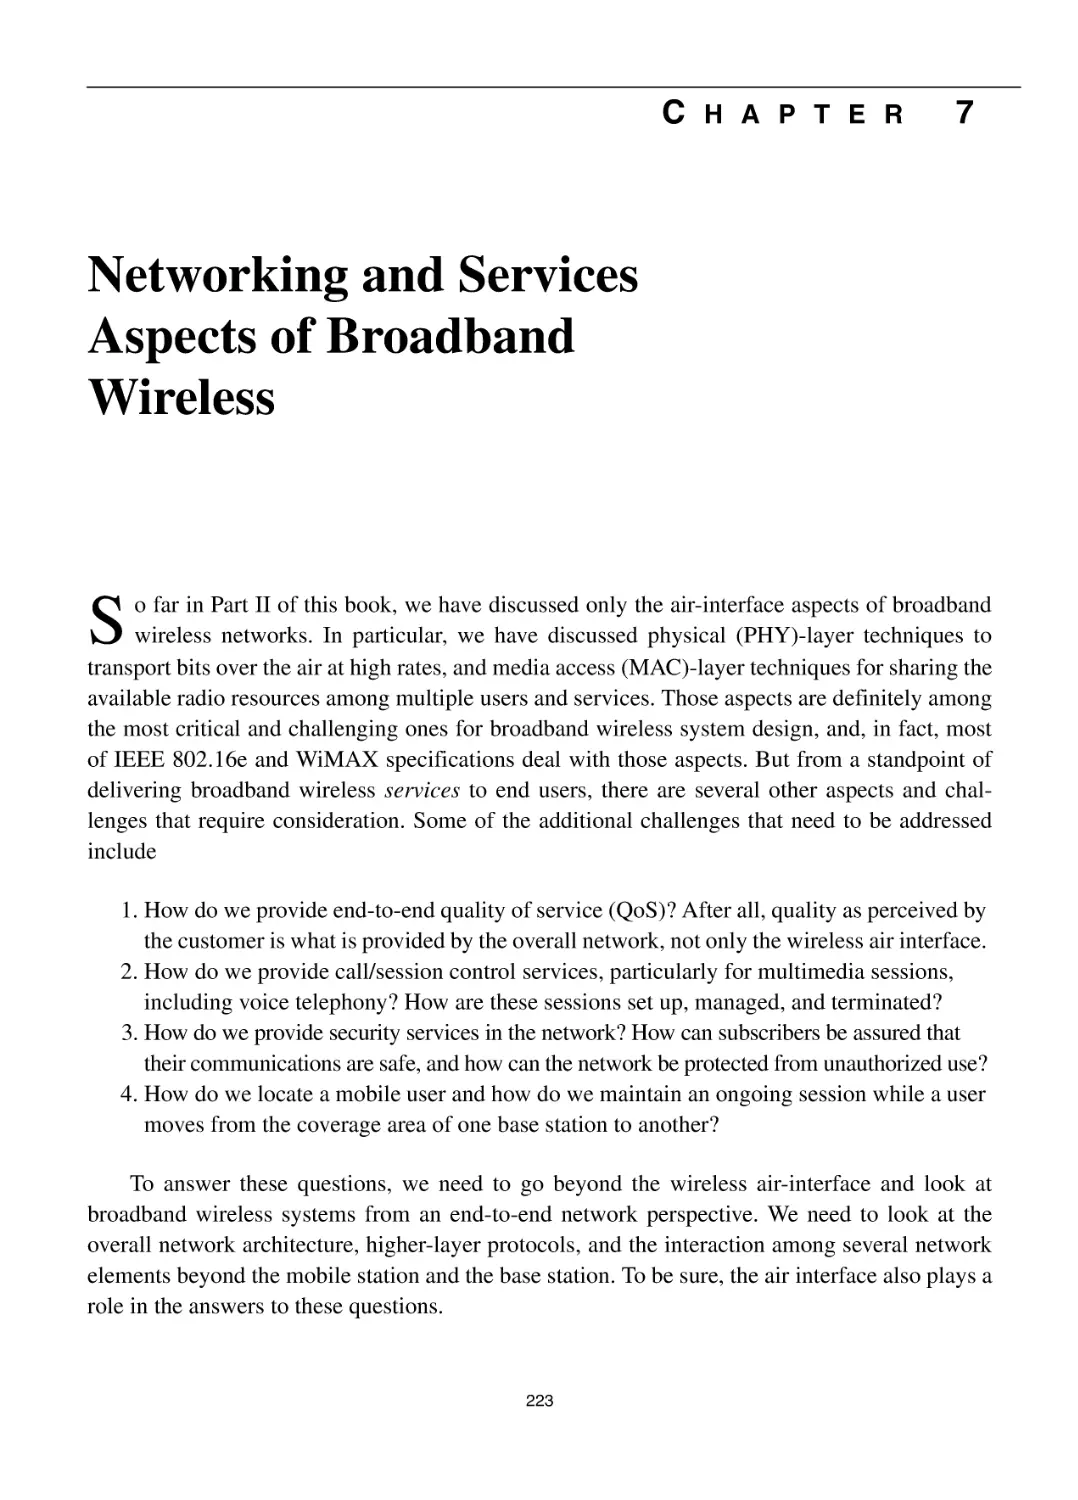 Chapter 7 Networking and Services Aspects of Broadband Wireless